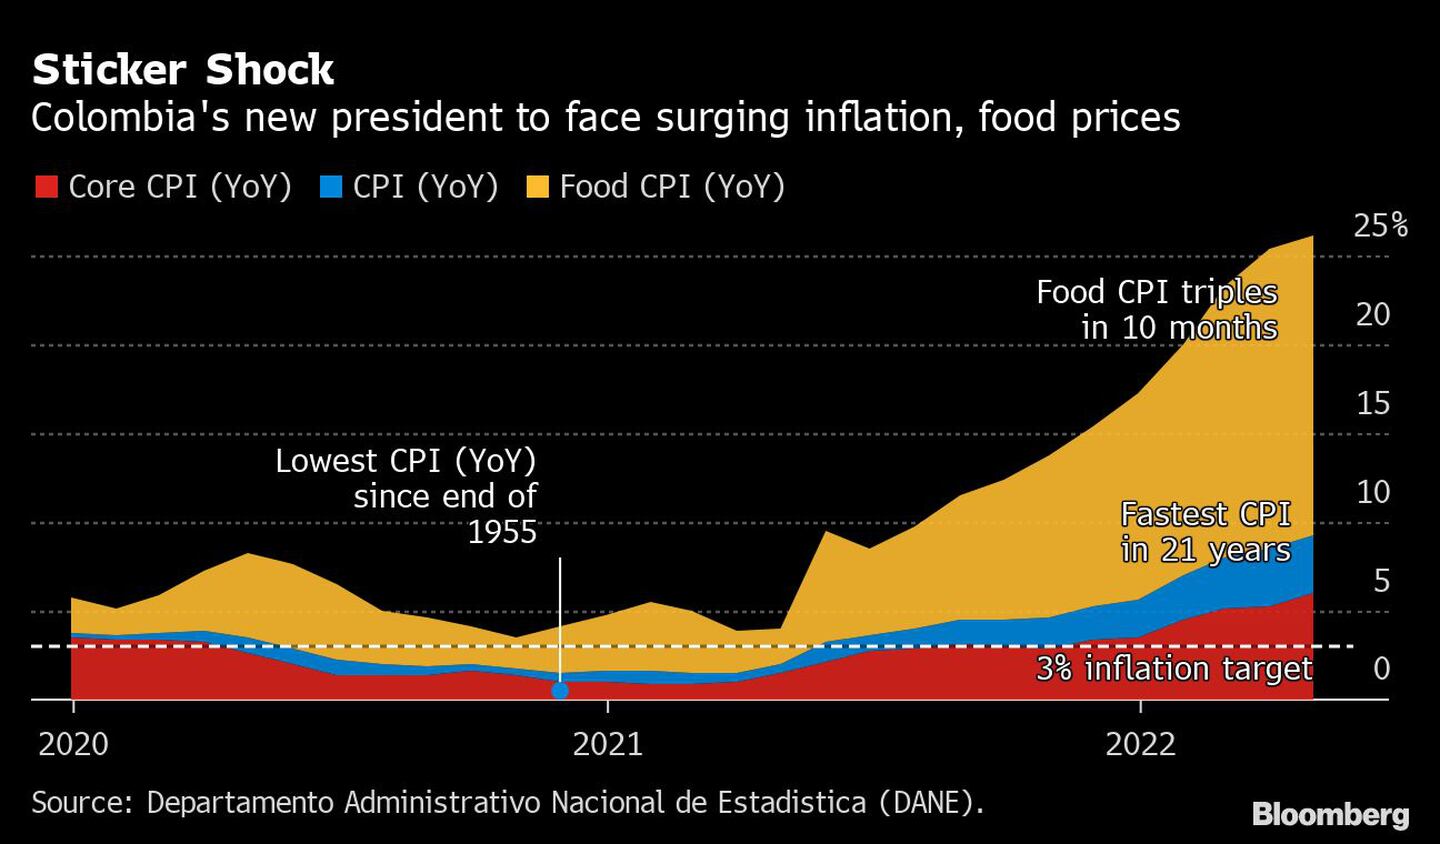 Sticker Shock | Colombia's new president to face surging inflation, food pricesdfd